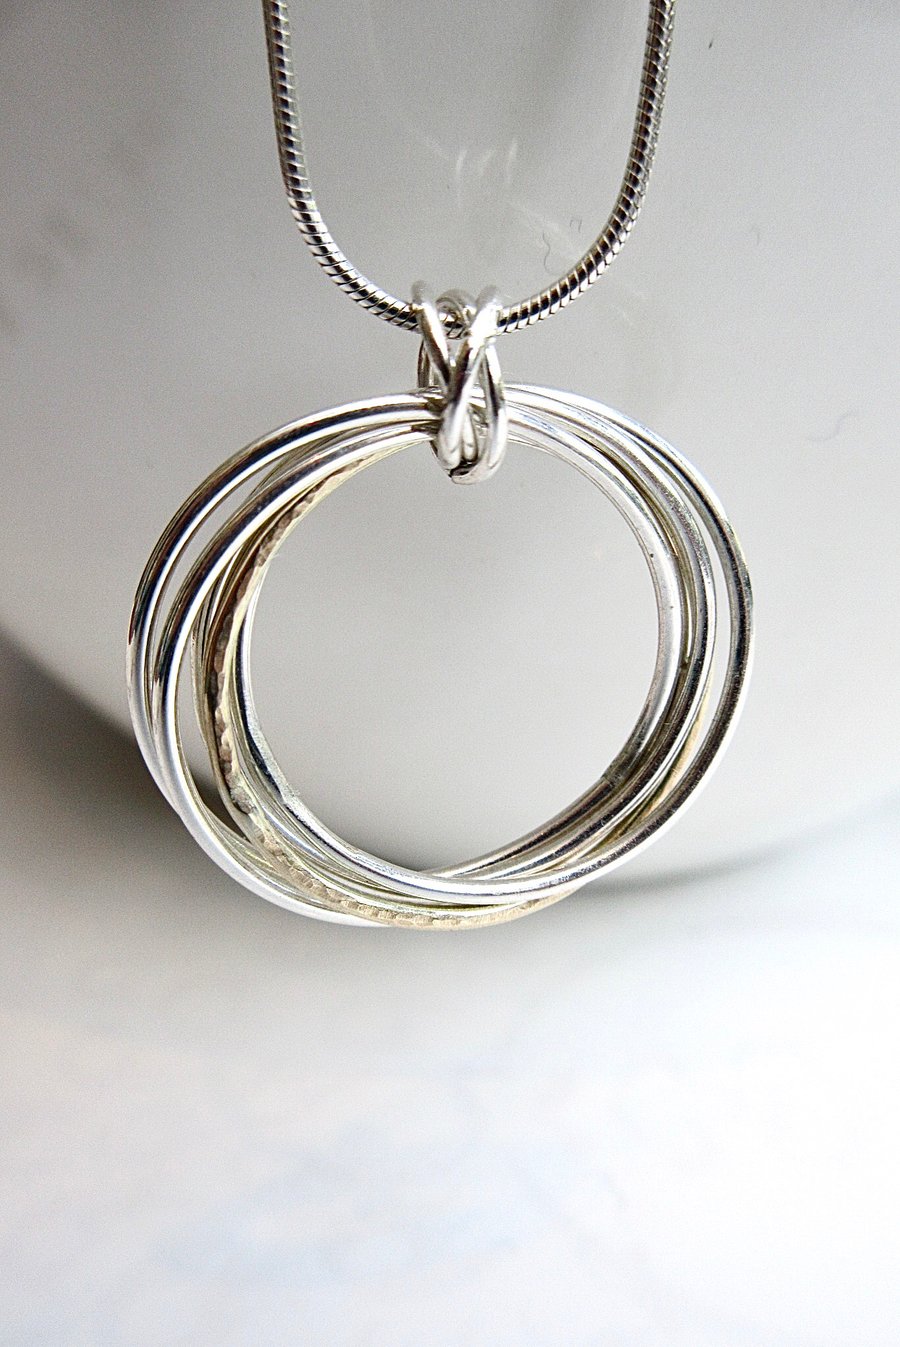 Handmade Sterling Silver & 9ct Gold Circles Pendant